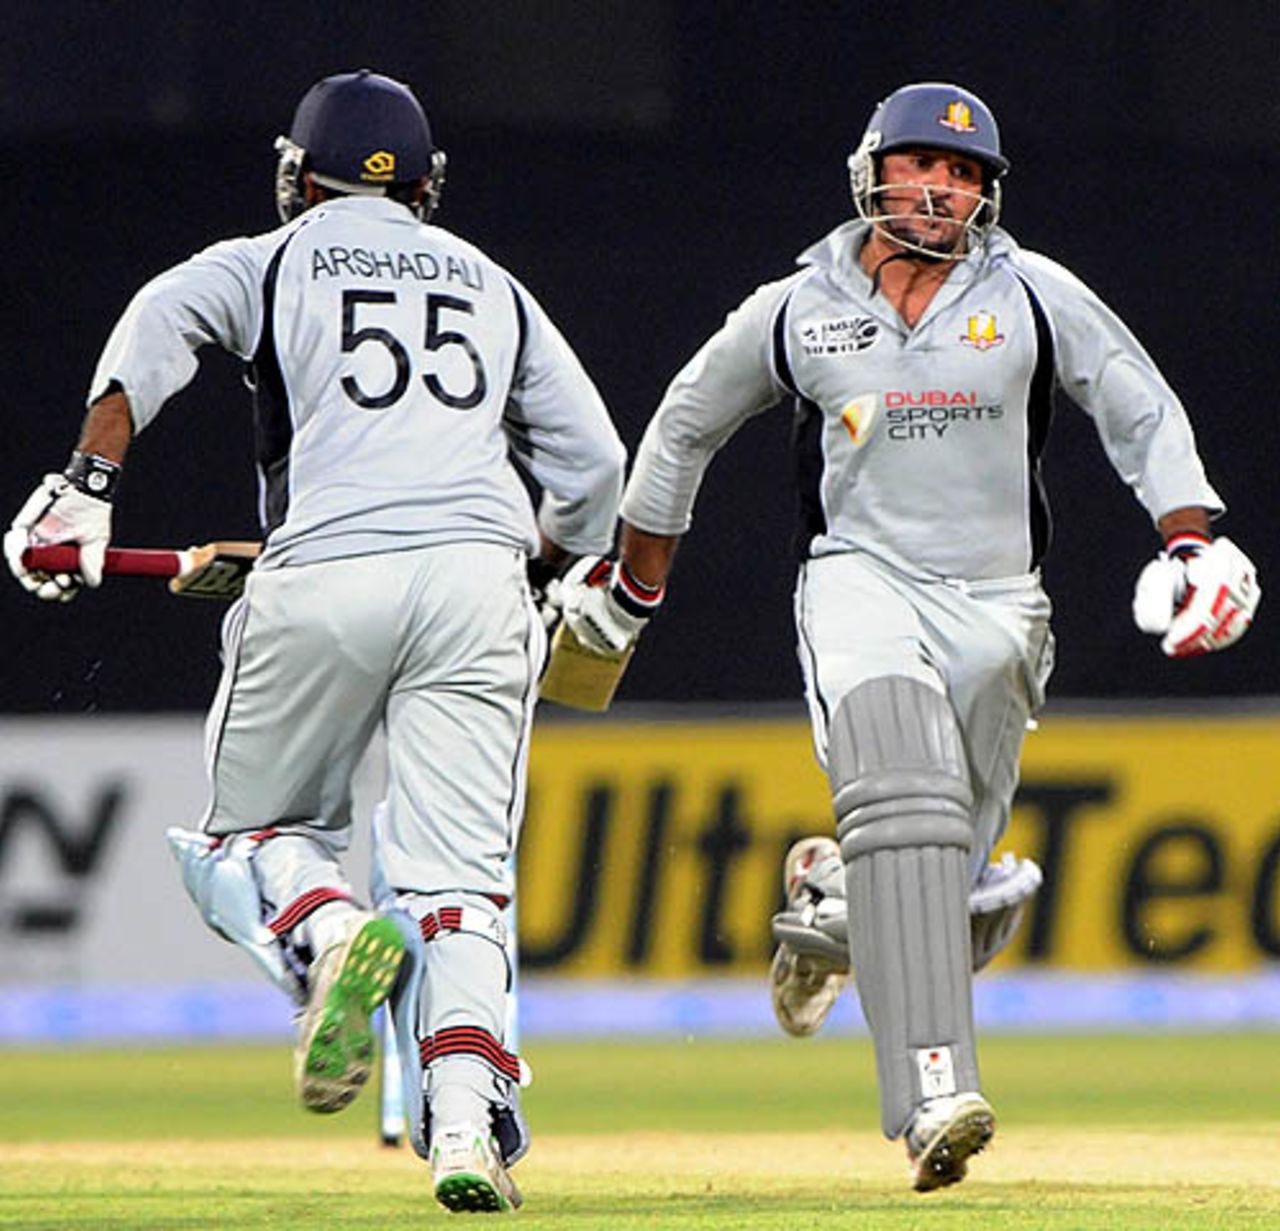 Arshad Ali and Amjad Ali rush for a run, Bangladesh v UAE, Group A, Asia Cup, Lahore, June 24, 2008